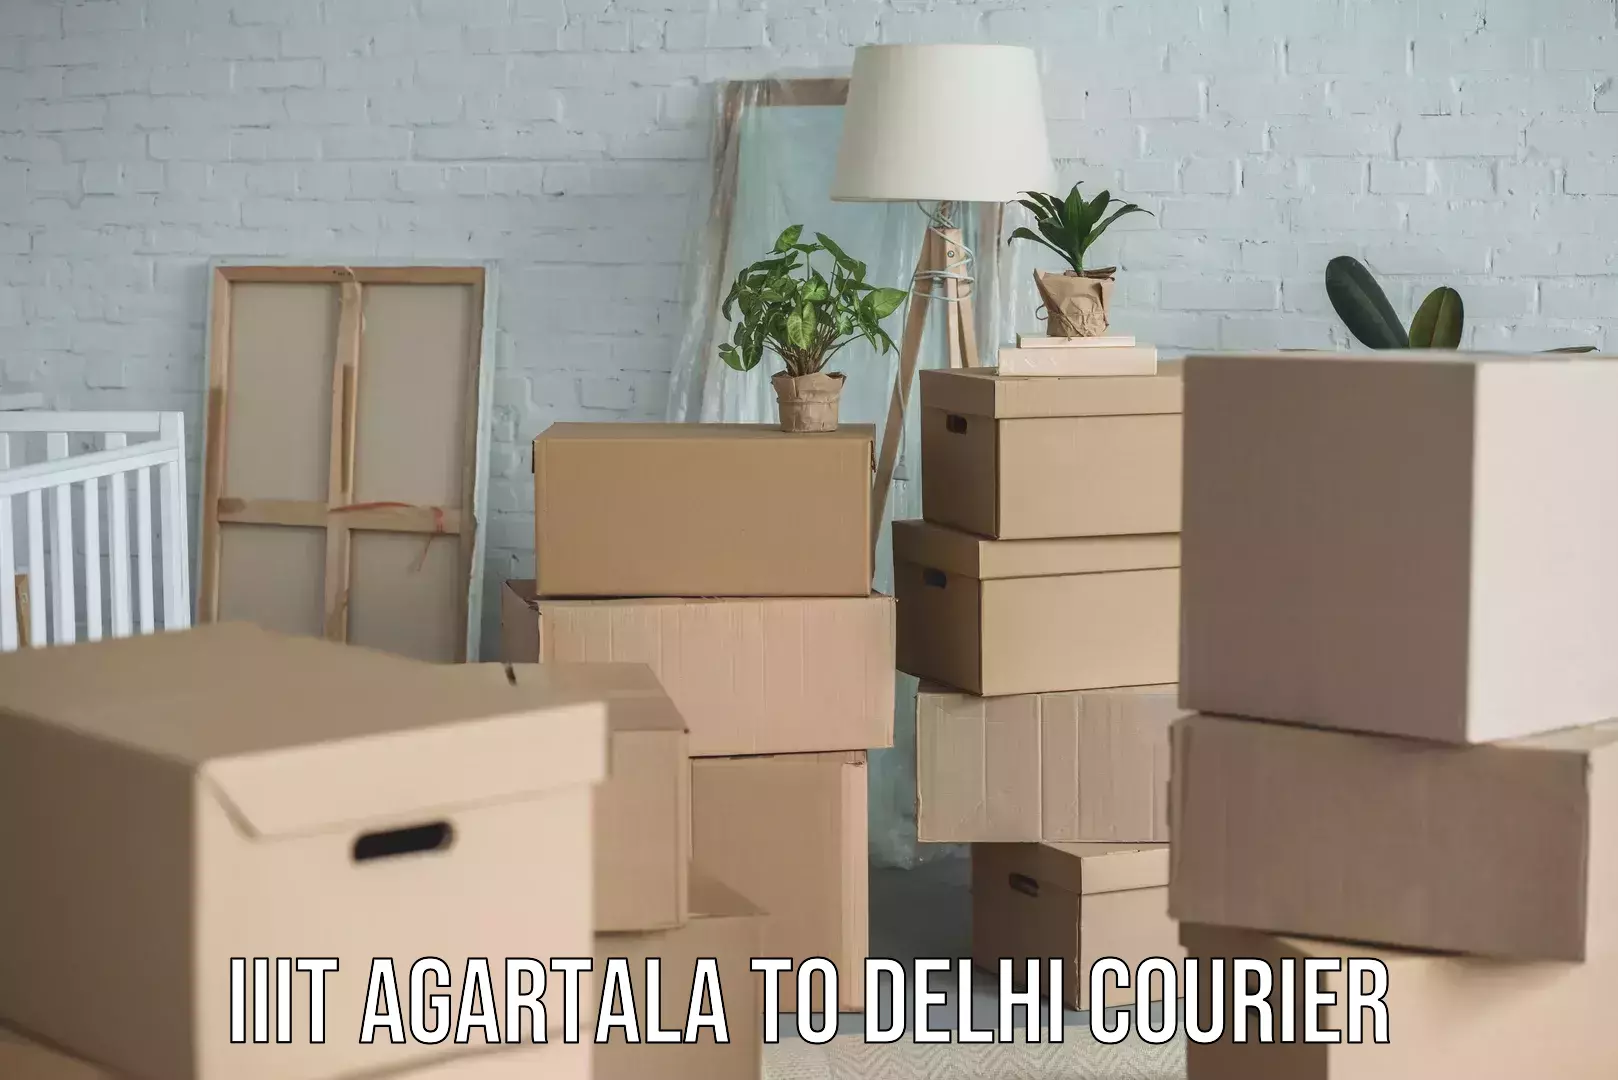 Same-day delivery solutions IIIT Agartala to Delhi